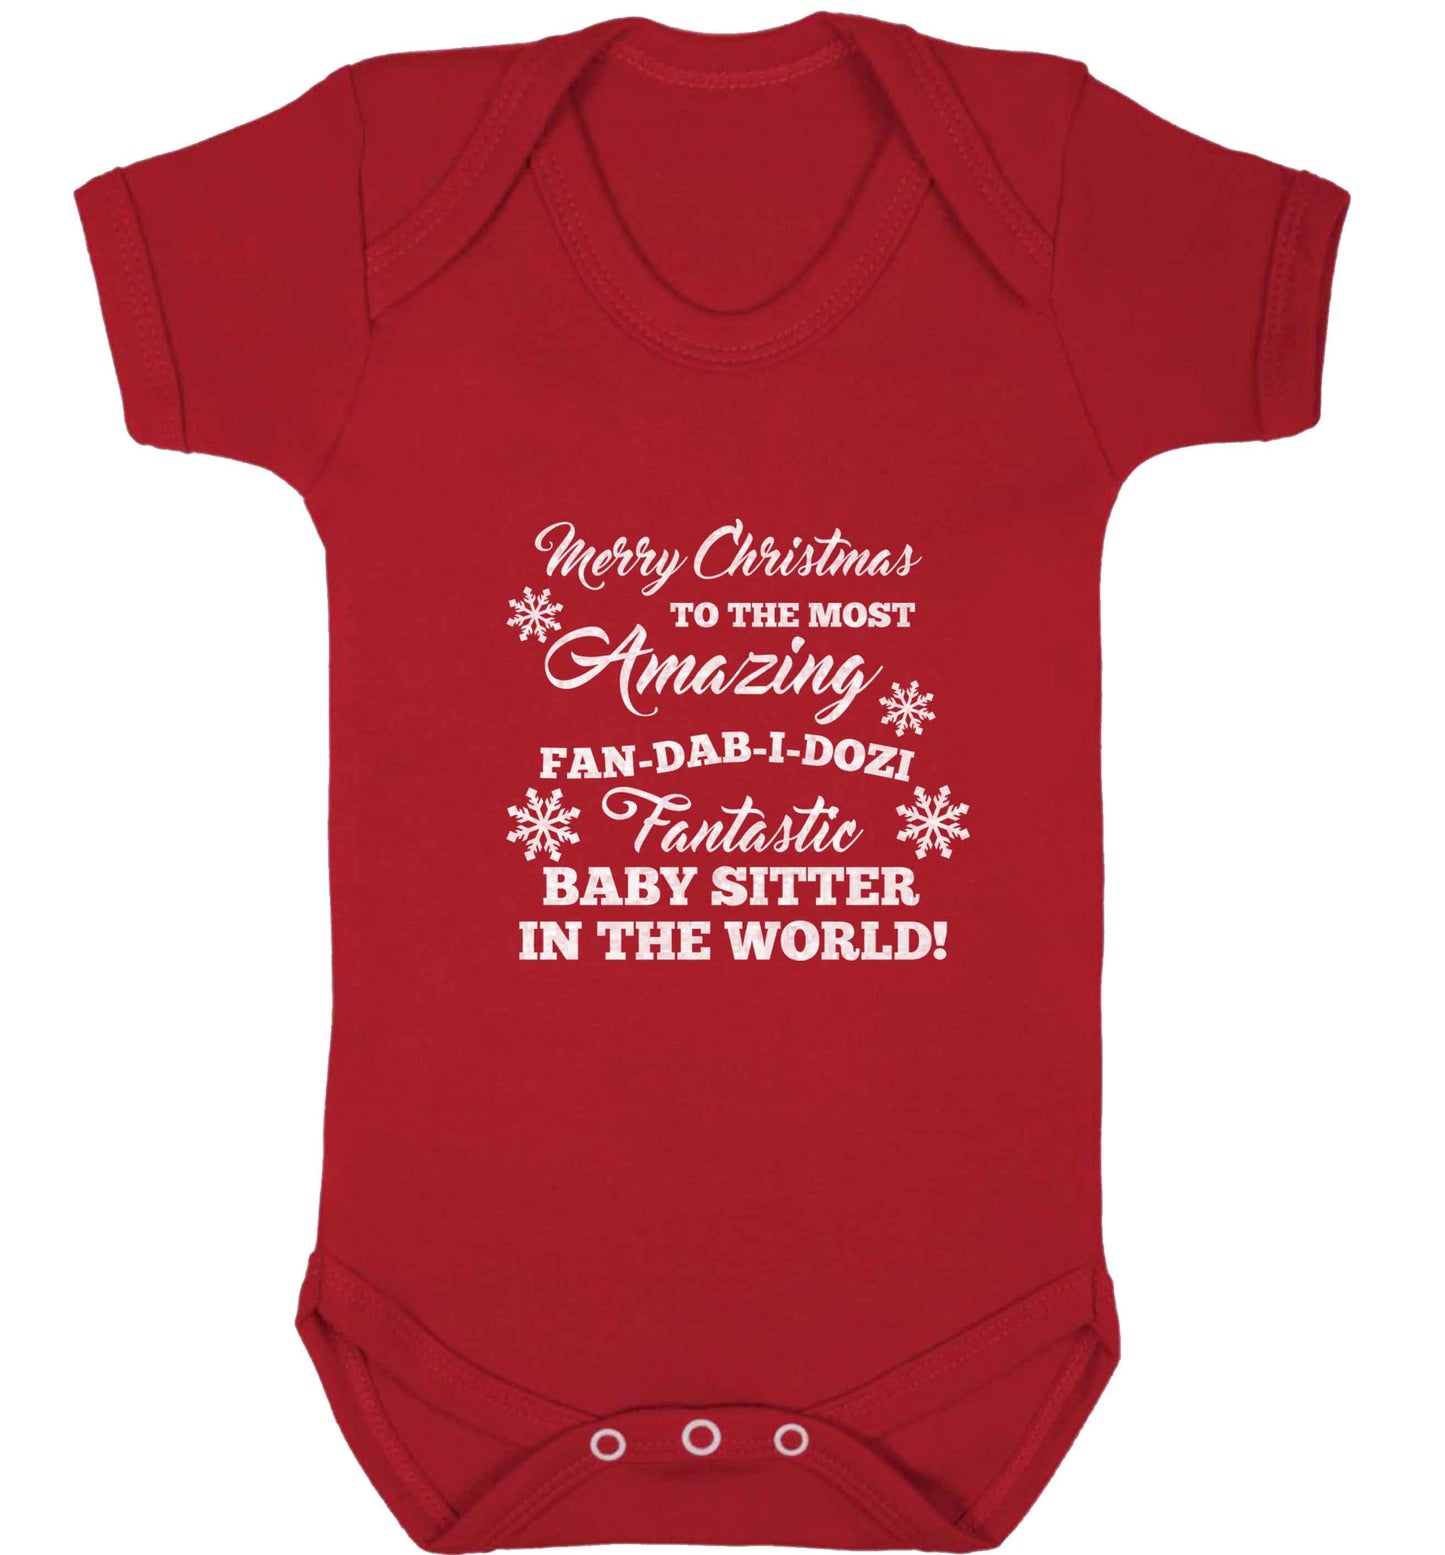 Merry Christmas to the most amazing fan-dab-i-dozi fantasic baby sitter in the world baby vest red 18-24 months